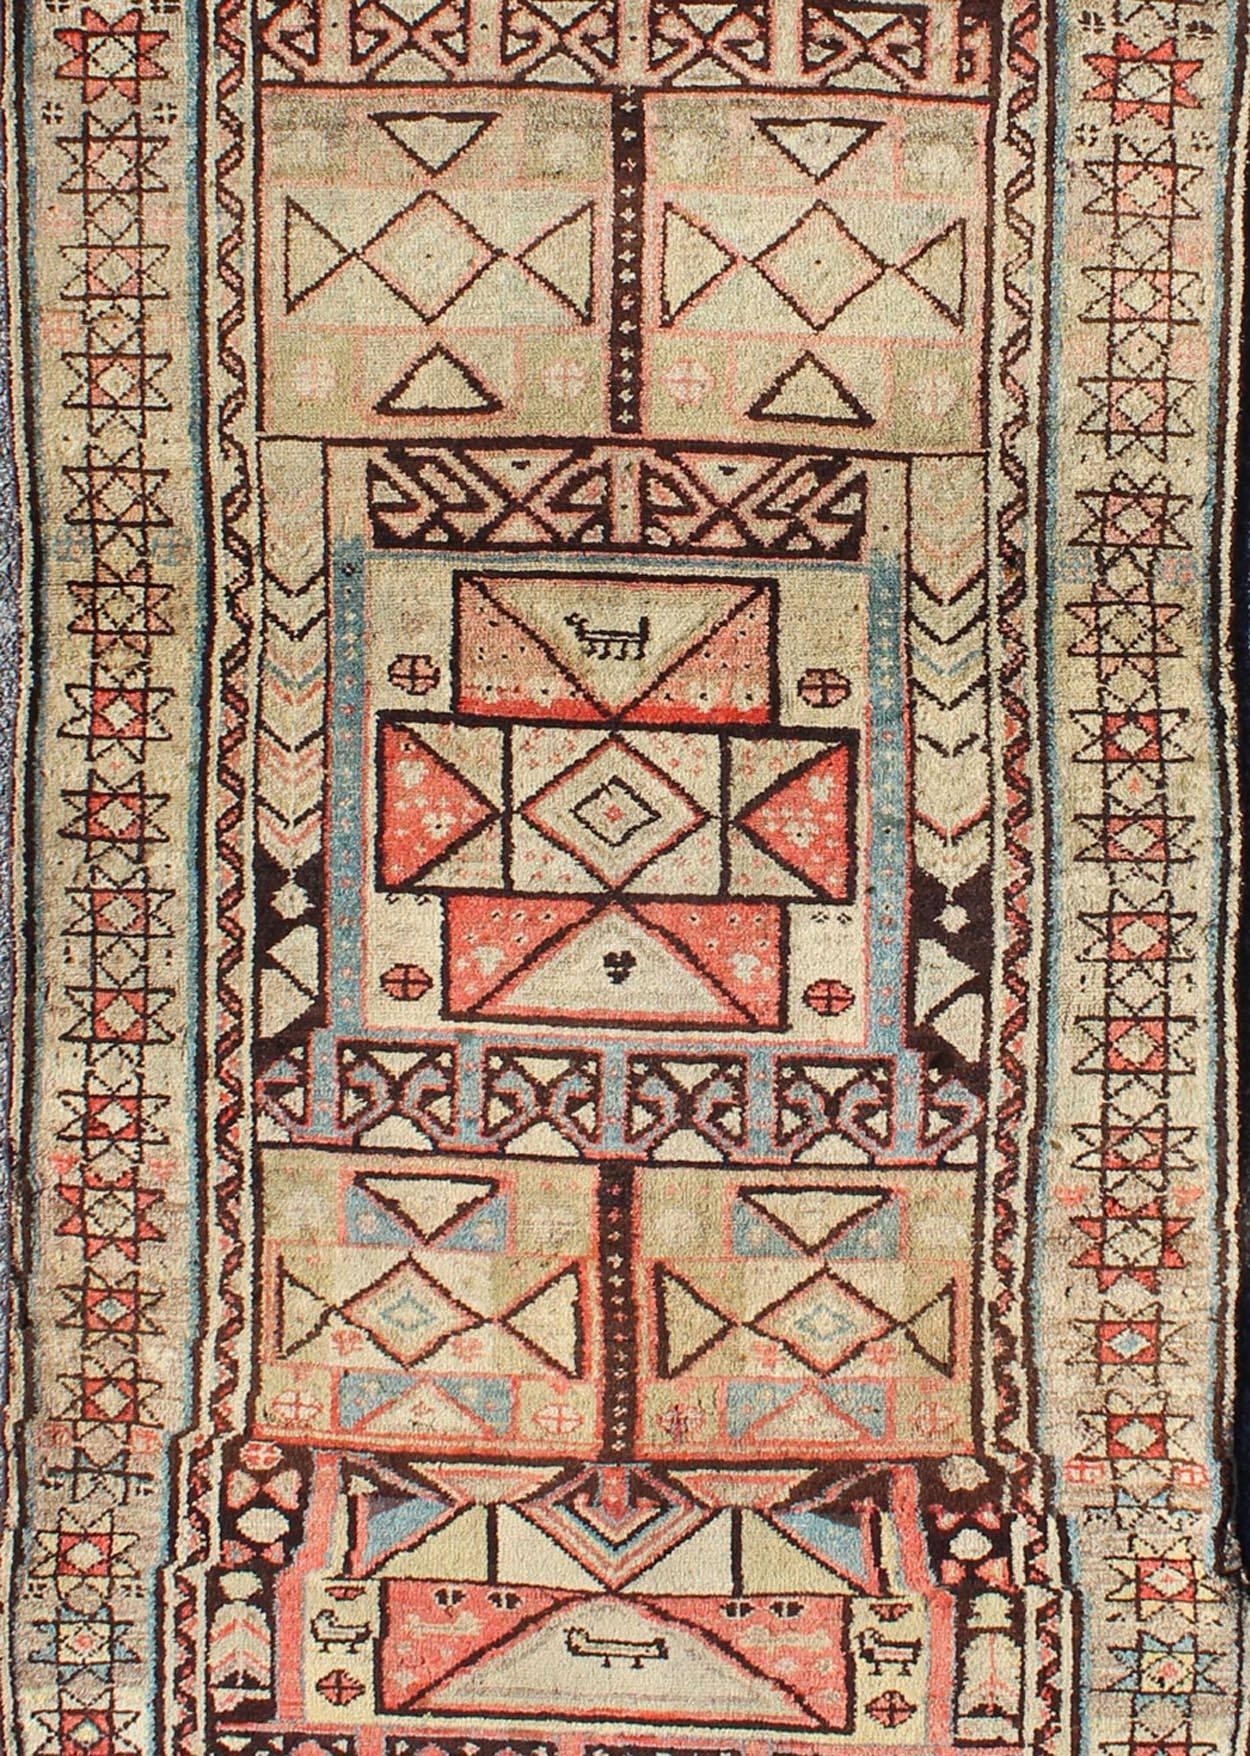 Early 20th century tribal antique Serab runner with colorful geometric pattern, rug l11-0914, country of origin / type: Iran / tribal, circa 1900

The stirring composition of this exemplary runner is characterized by a tribal geometric pattern and